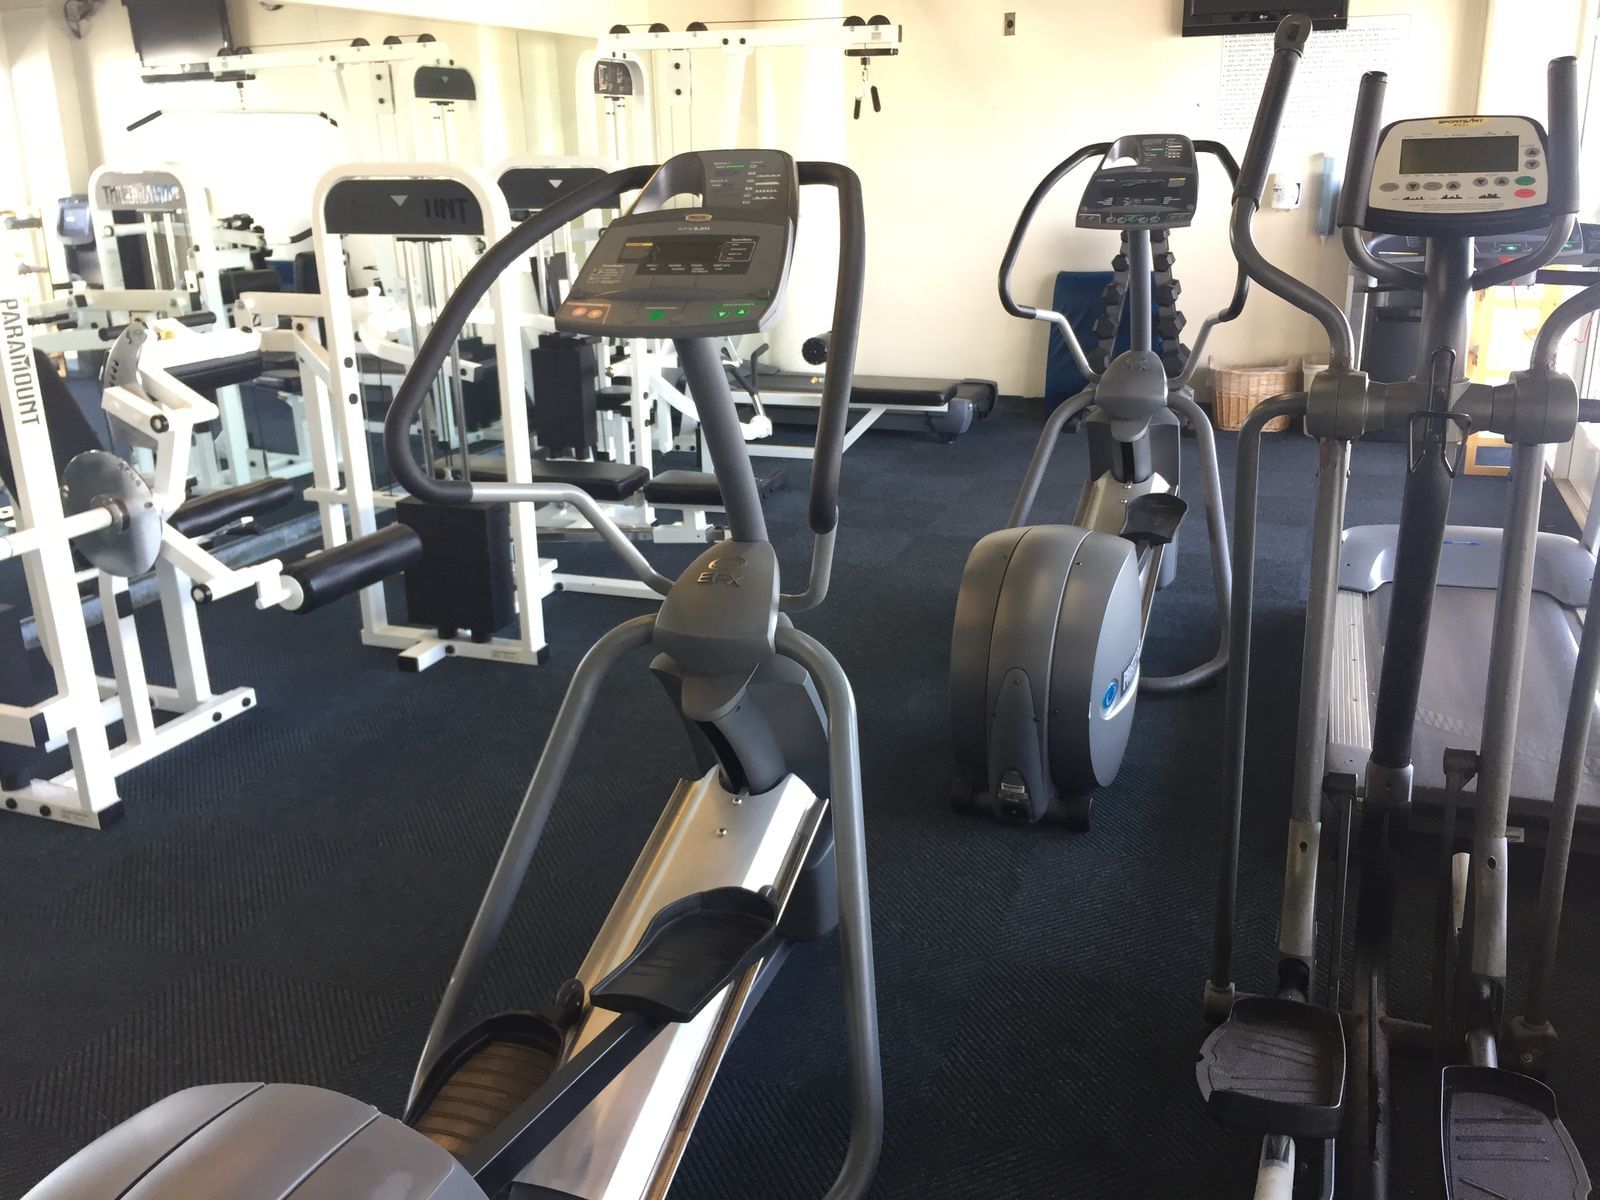 Exercise machines in the hotel gym at Bay Club Hotel